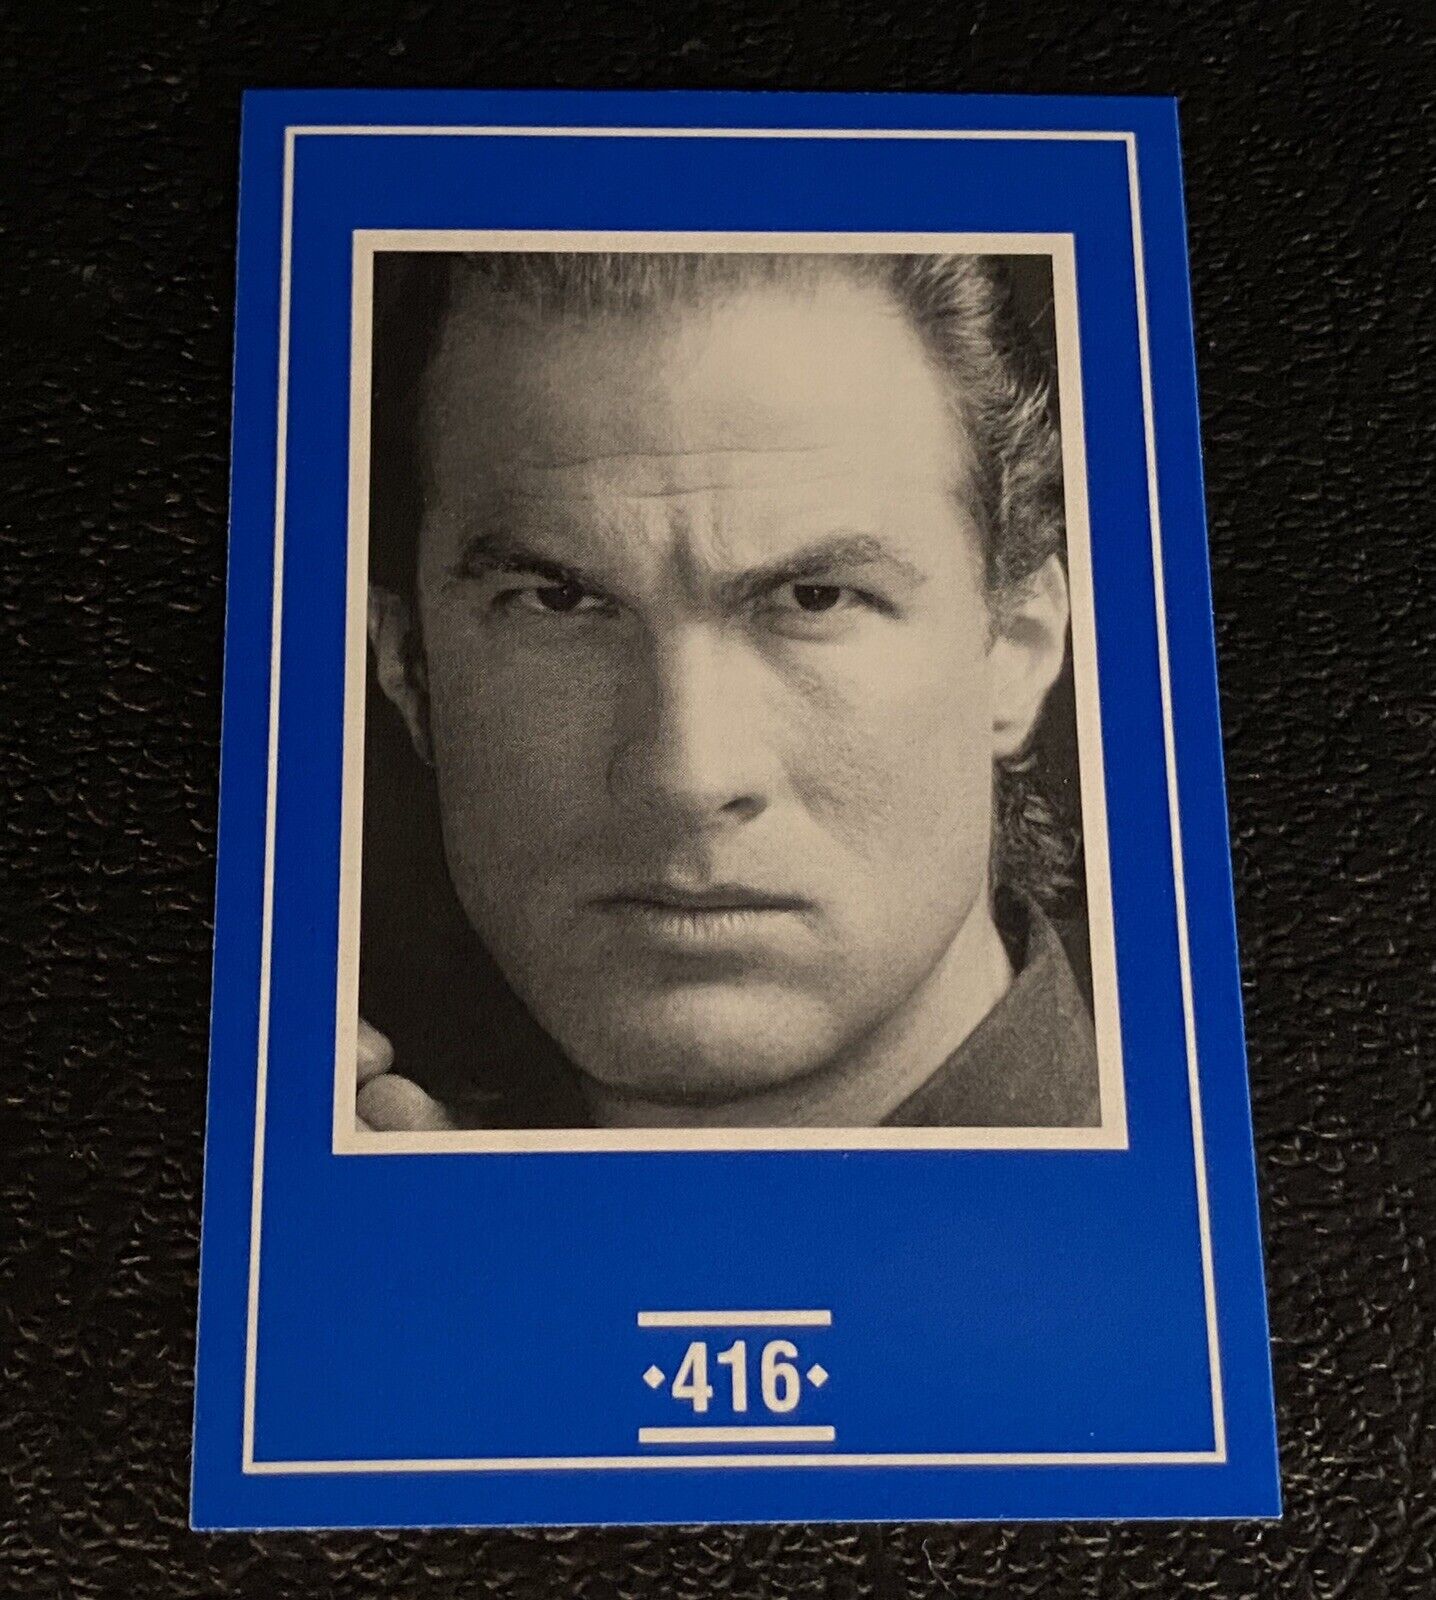 1991 Steven Seagal Rookie Card Face To Face Guessing Game 80s 90s Karate Movies